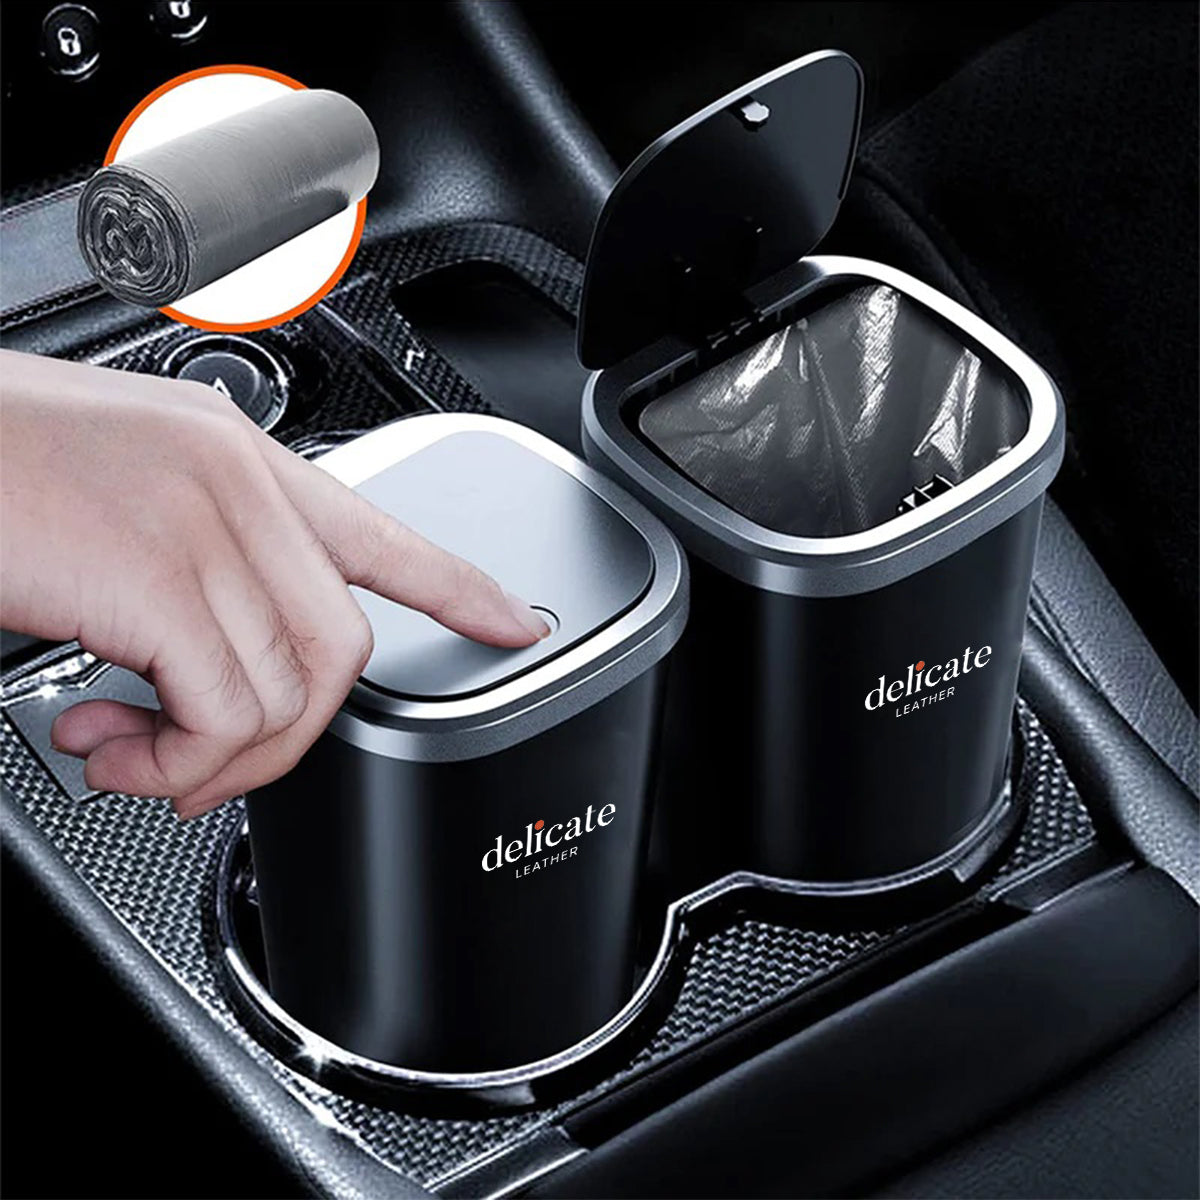 Car Trash Cans, Custom For Your Cars, Compact & Durable Car Accessories for Interior Use 2 Pack, Practical Car Organizers and Storage Cups with Pop-Up Open, Car Accessories JE11993 - Delicate Leather